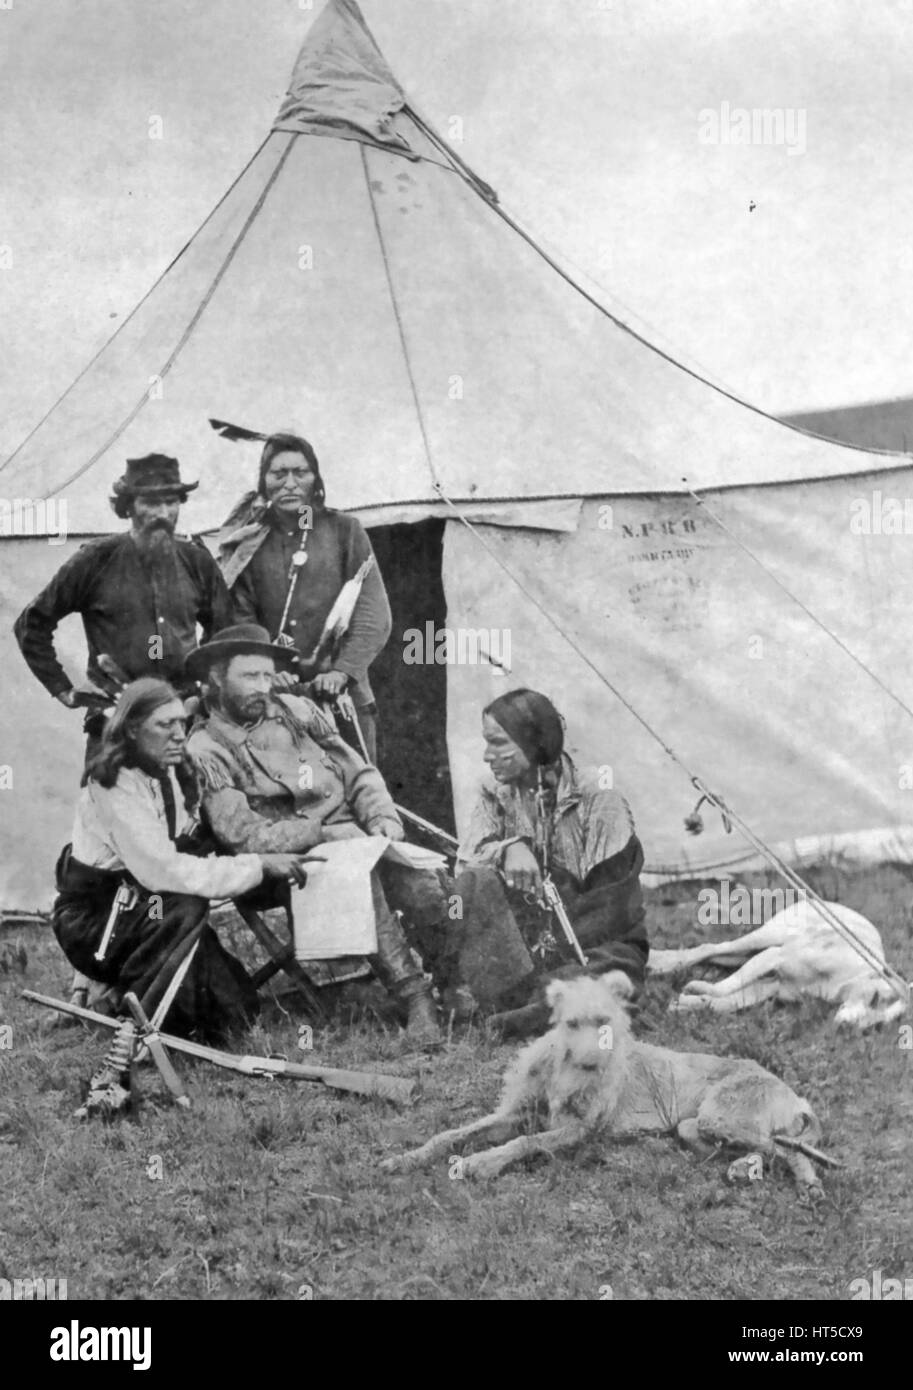 GEORGE ARMSTRONG CUSTER (1836-1876)  American cavalry commander while in charge of protecting workers building the Northern Pacific Railroad in Montana about 1873.  Note the initials N.P.R.R. on the tent. Stock Photo